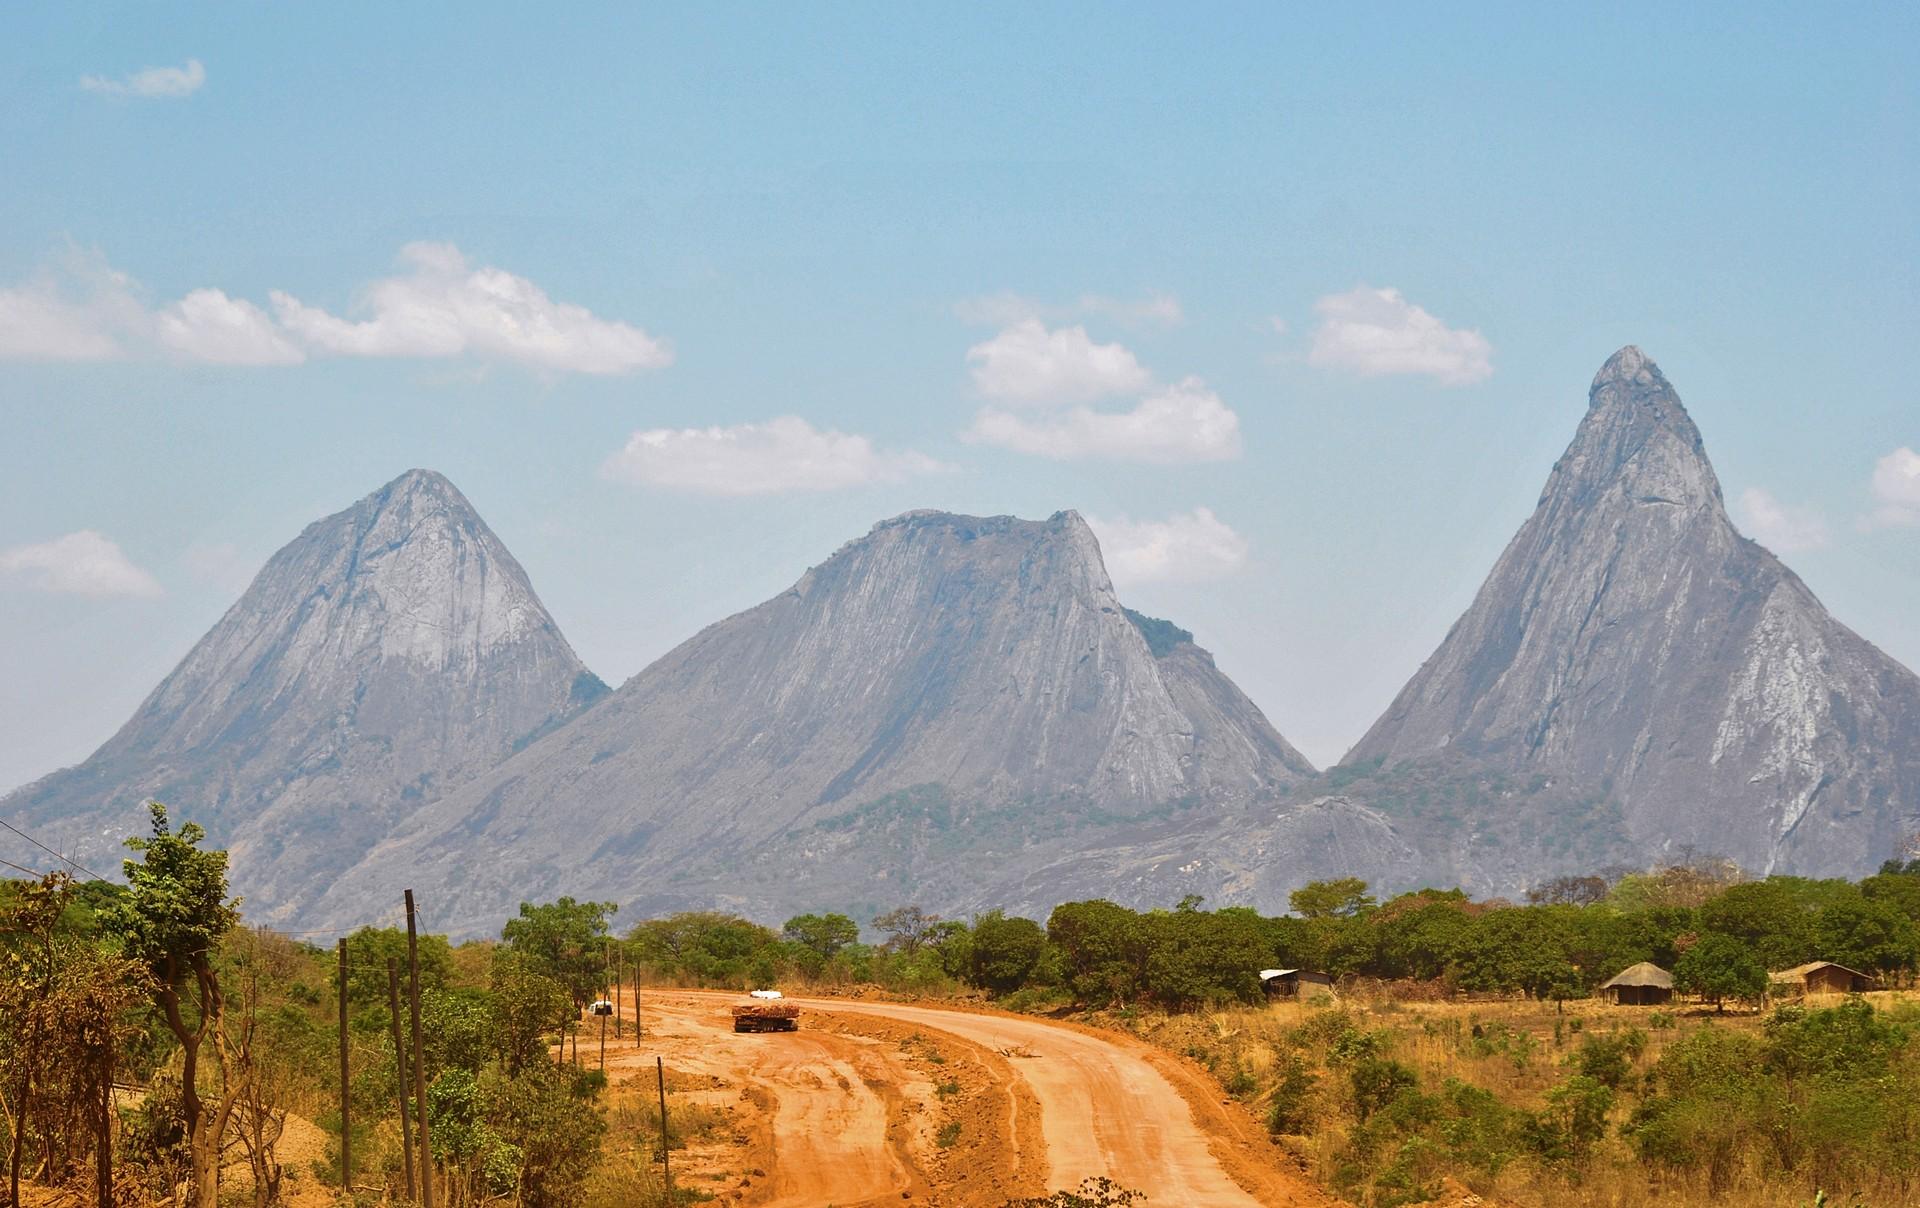 Mountain range in Mozambique in sunny weather with few clouds